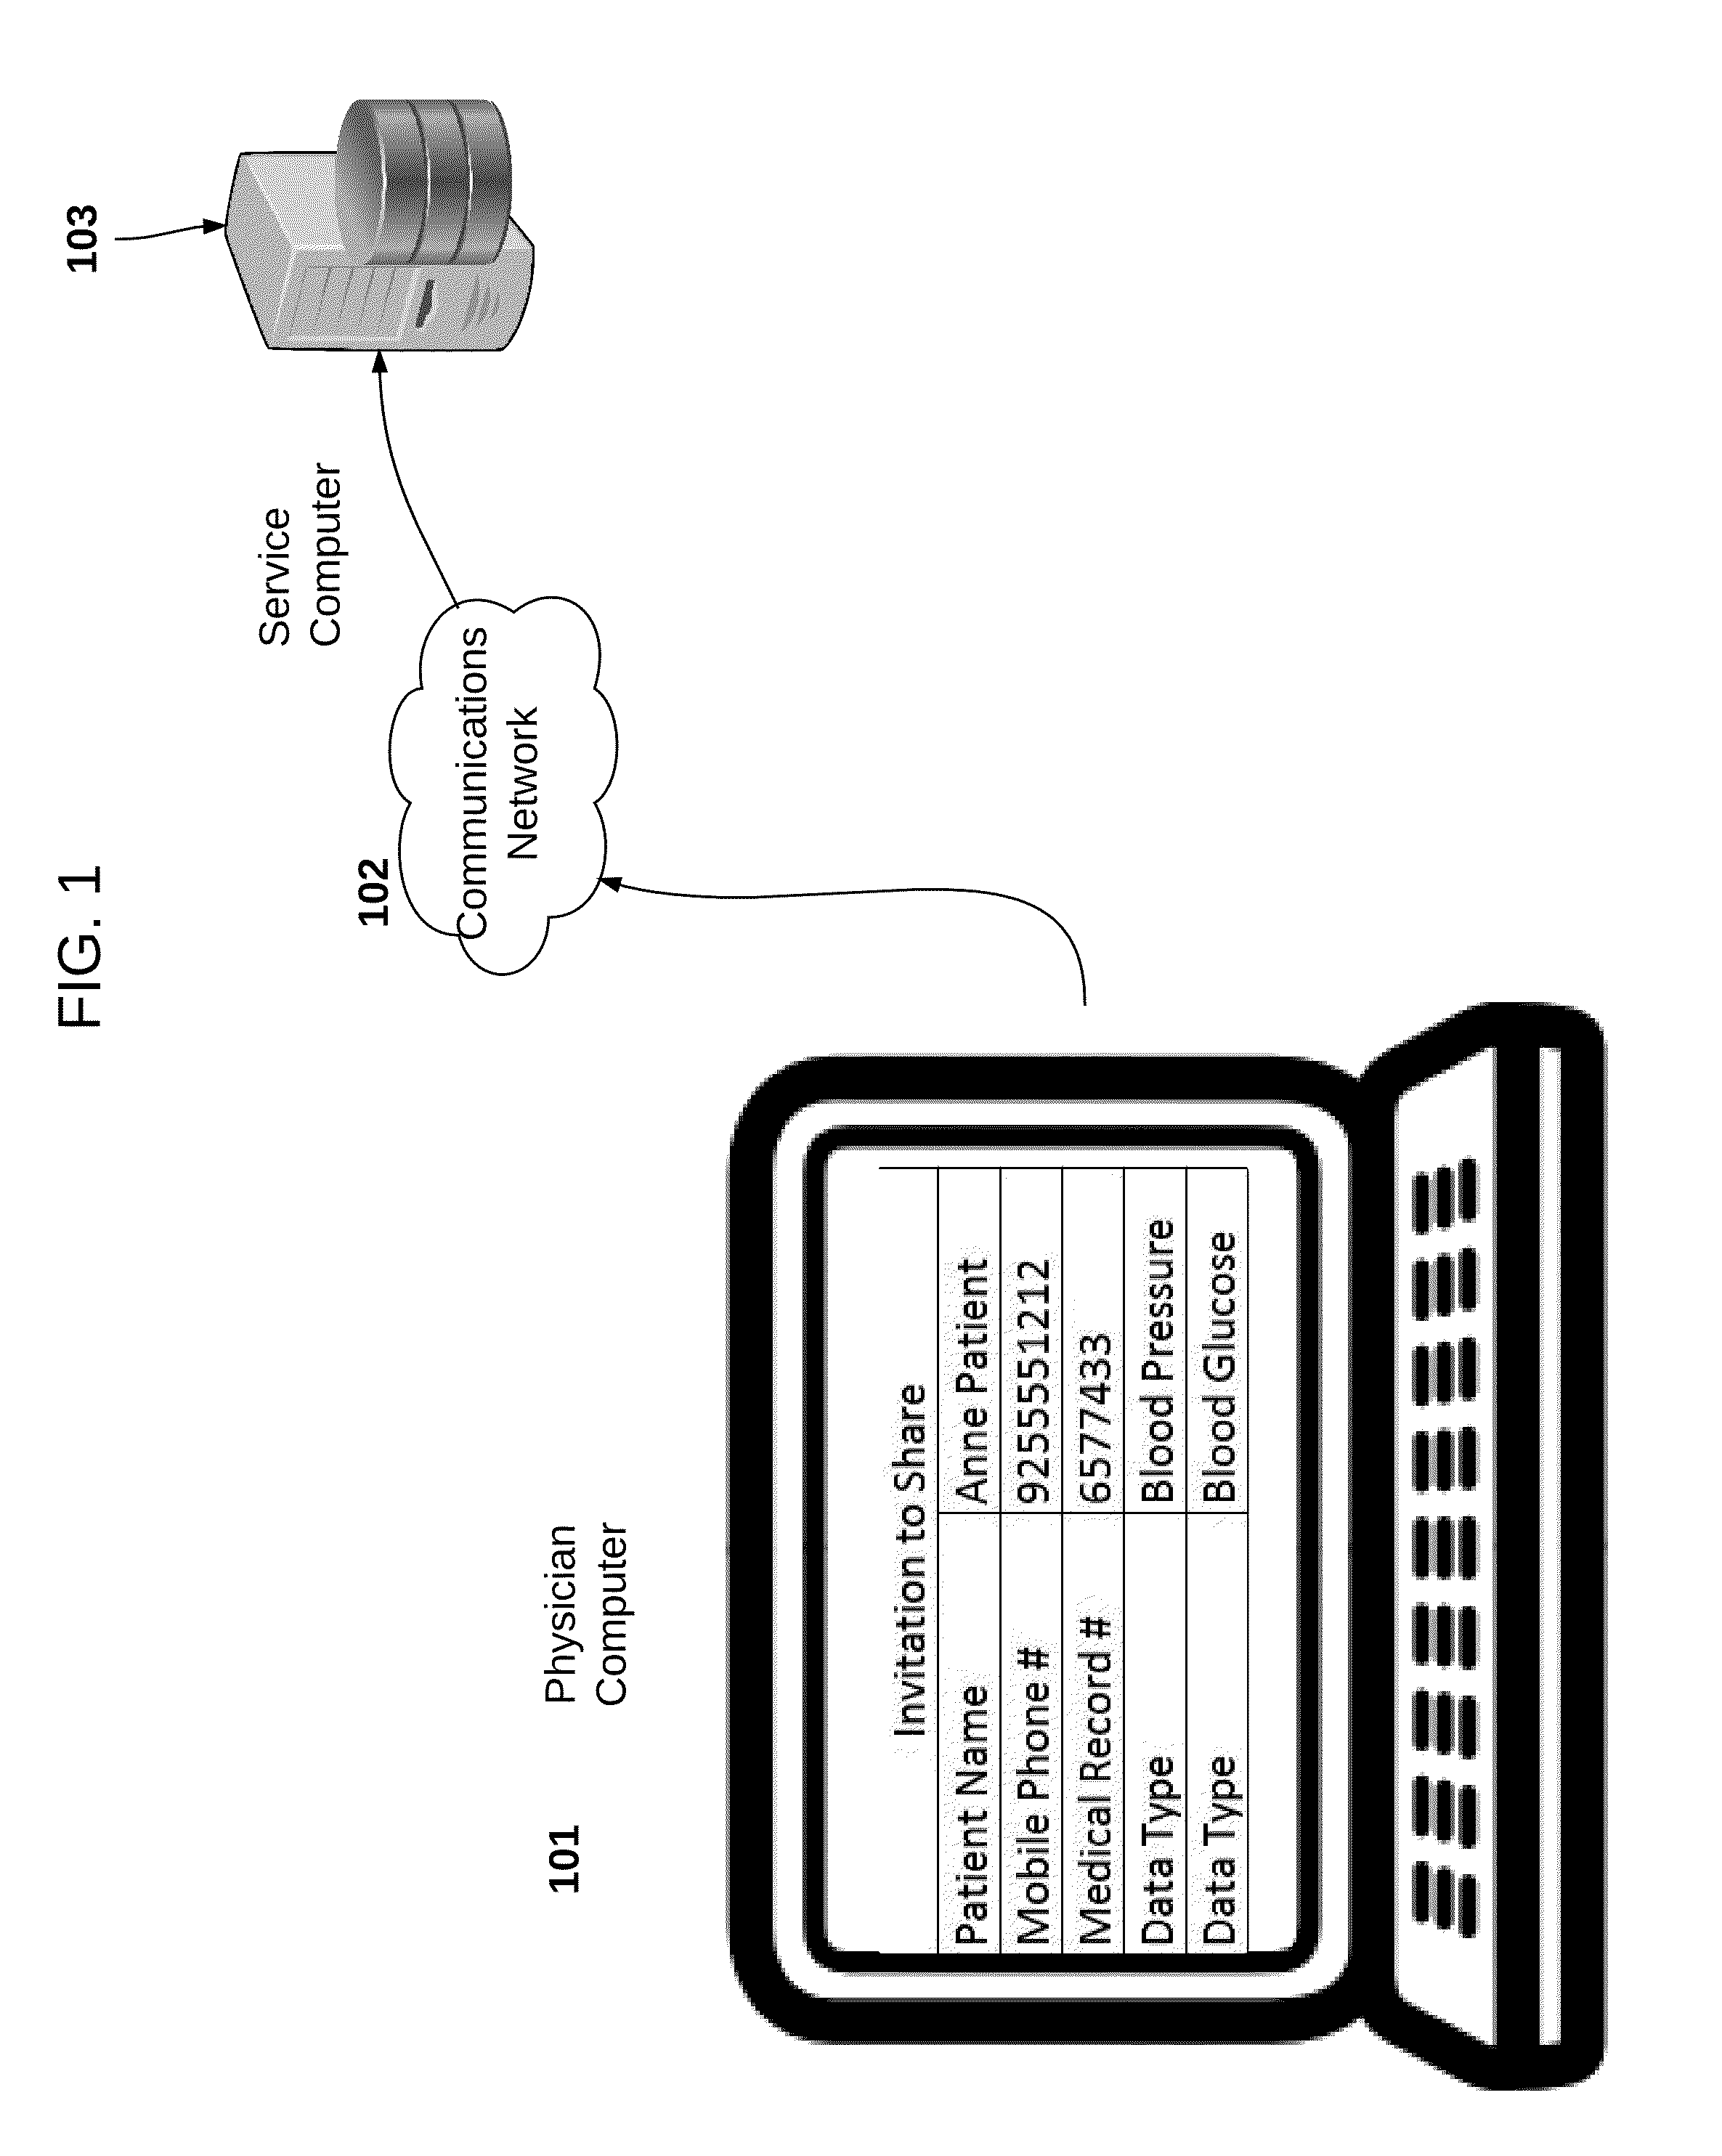 Method and system for creating and managing permissions to send, receive and transmit patient created health data between patients and health care providers